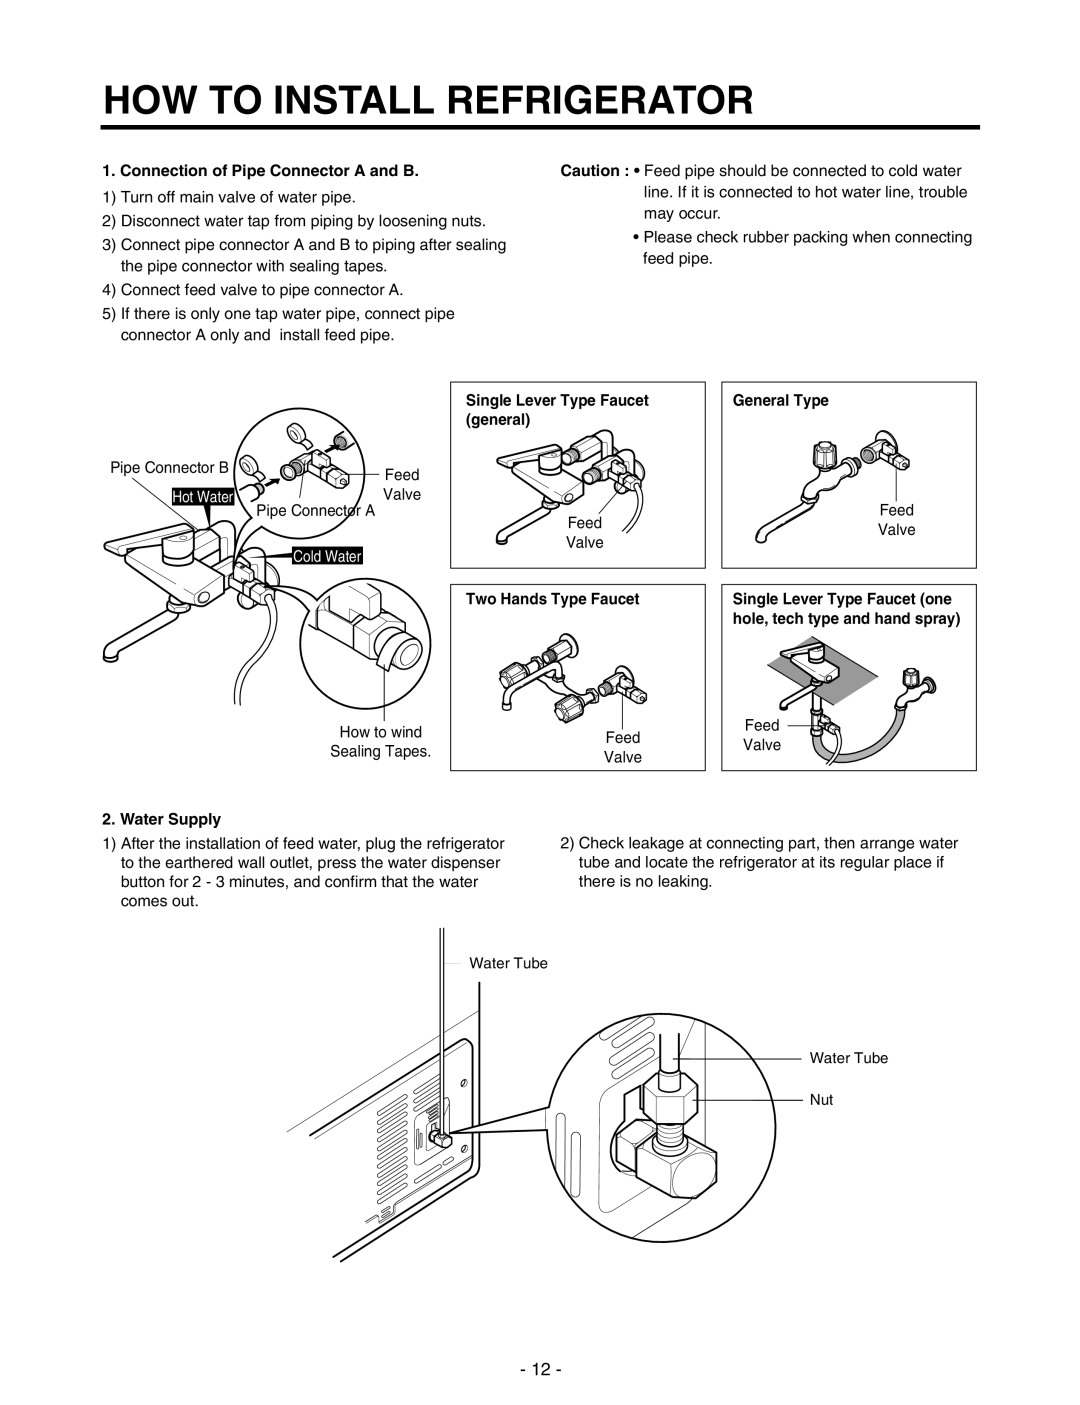 LG Electronics GR-P227/L227 How To Install Refrigerator, Connection of Pipe Connector A and B, Hot Water, Cold Water 